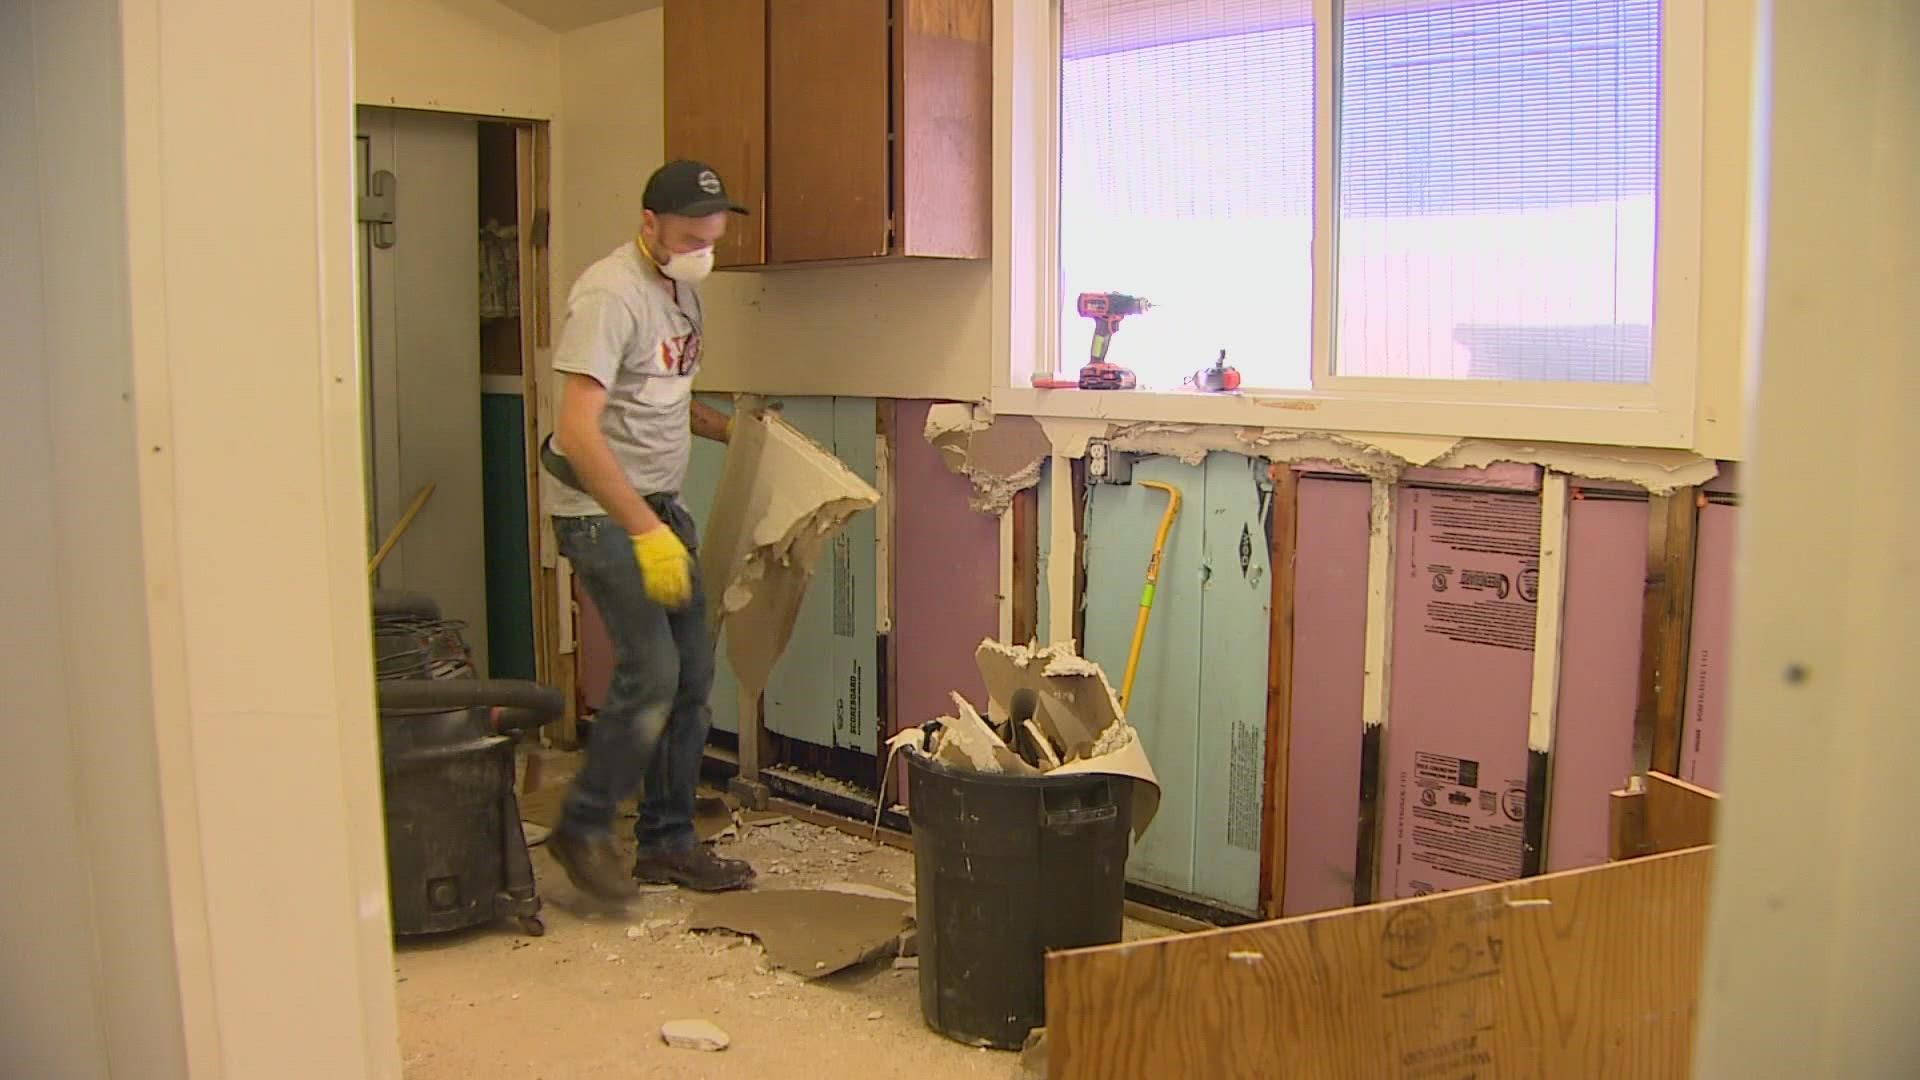 Nonprofit gets much-needed help from another group after disastrous flooding hits the area.